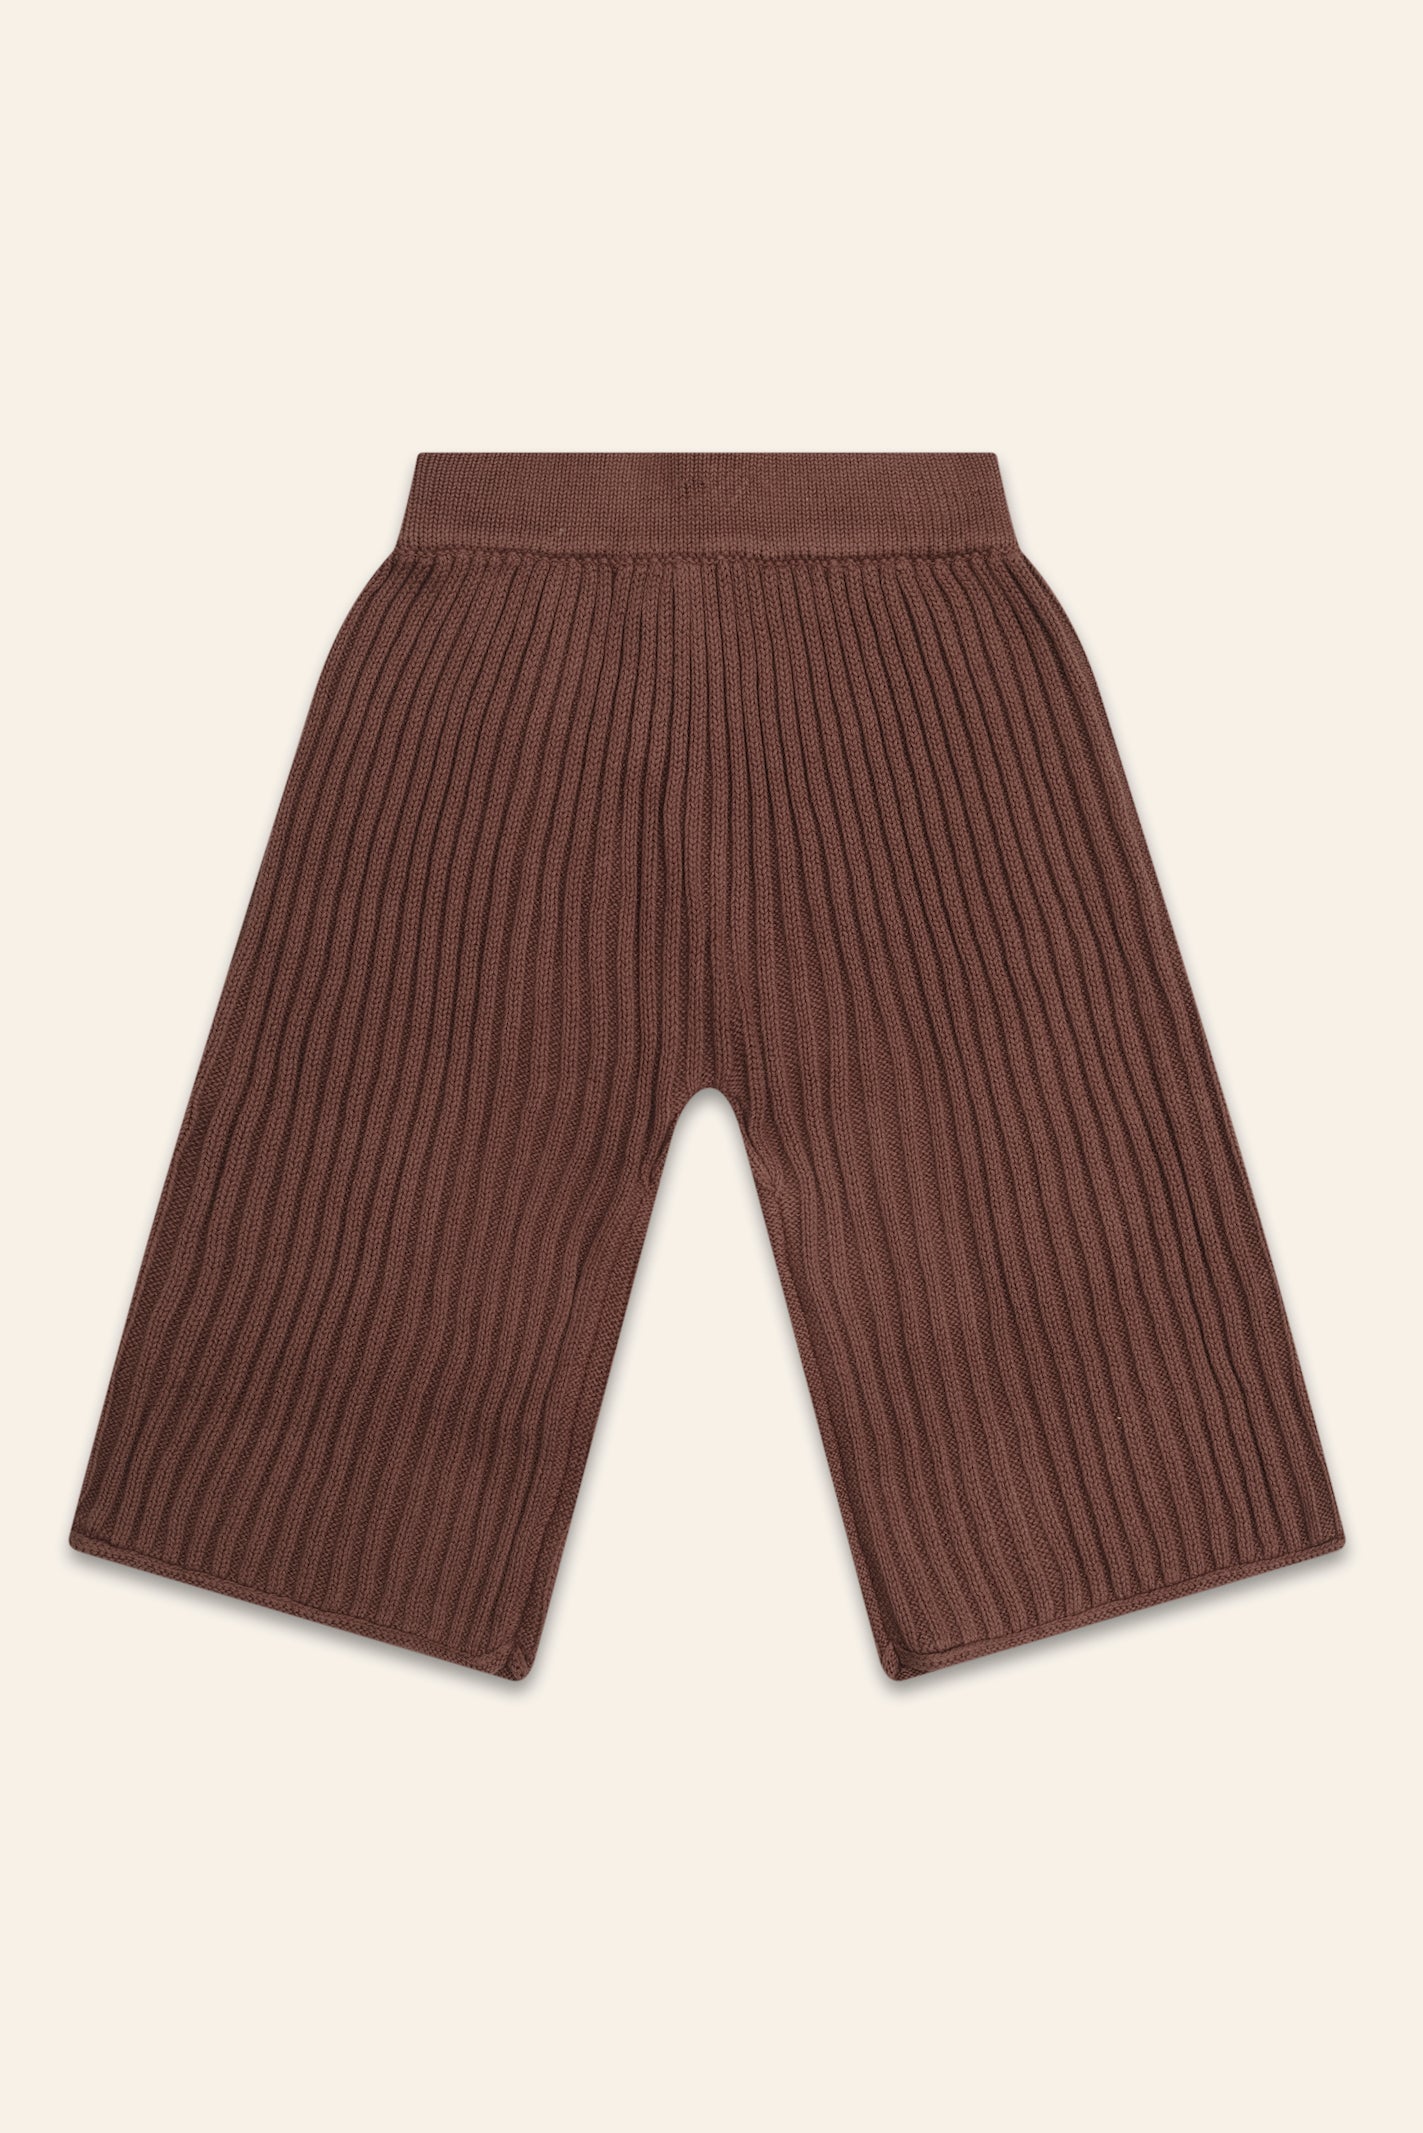 Essential Knit Pants // Cocoa